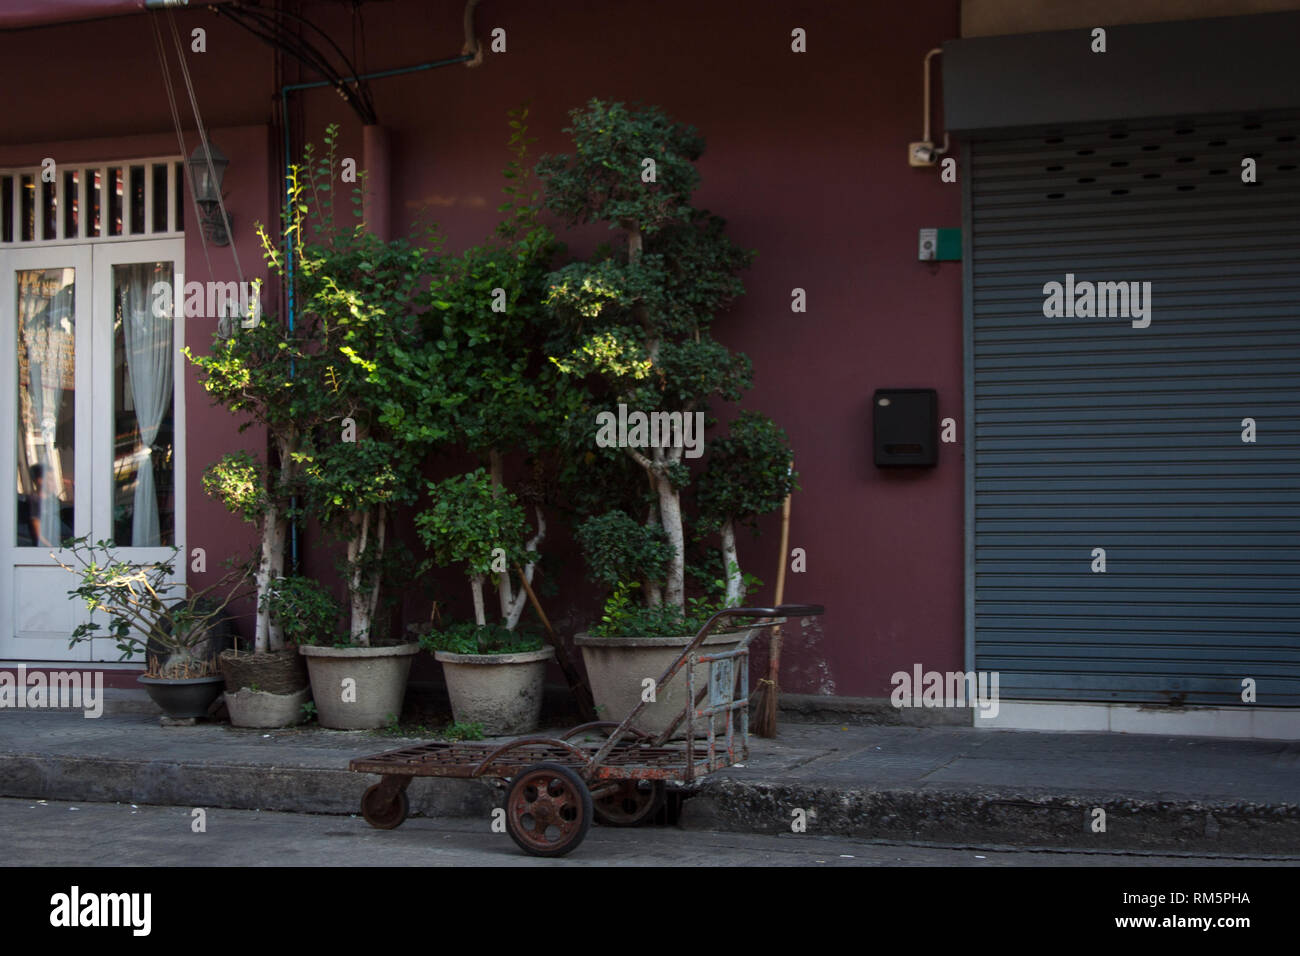 Metallic trolley, potted trees and broom in front of burgundy wall with roller shutter and post box on the street of Bangkok, Thailand Stock Photo